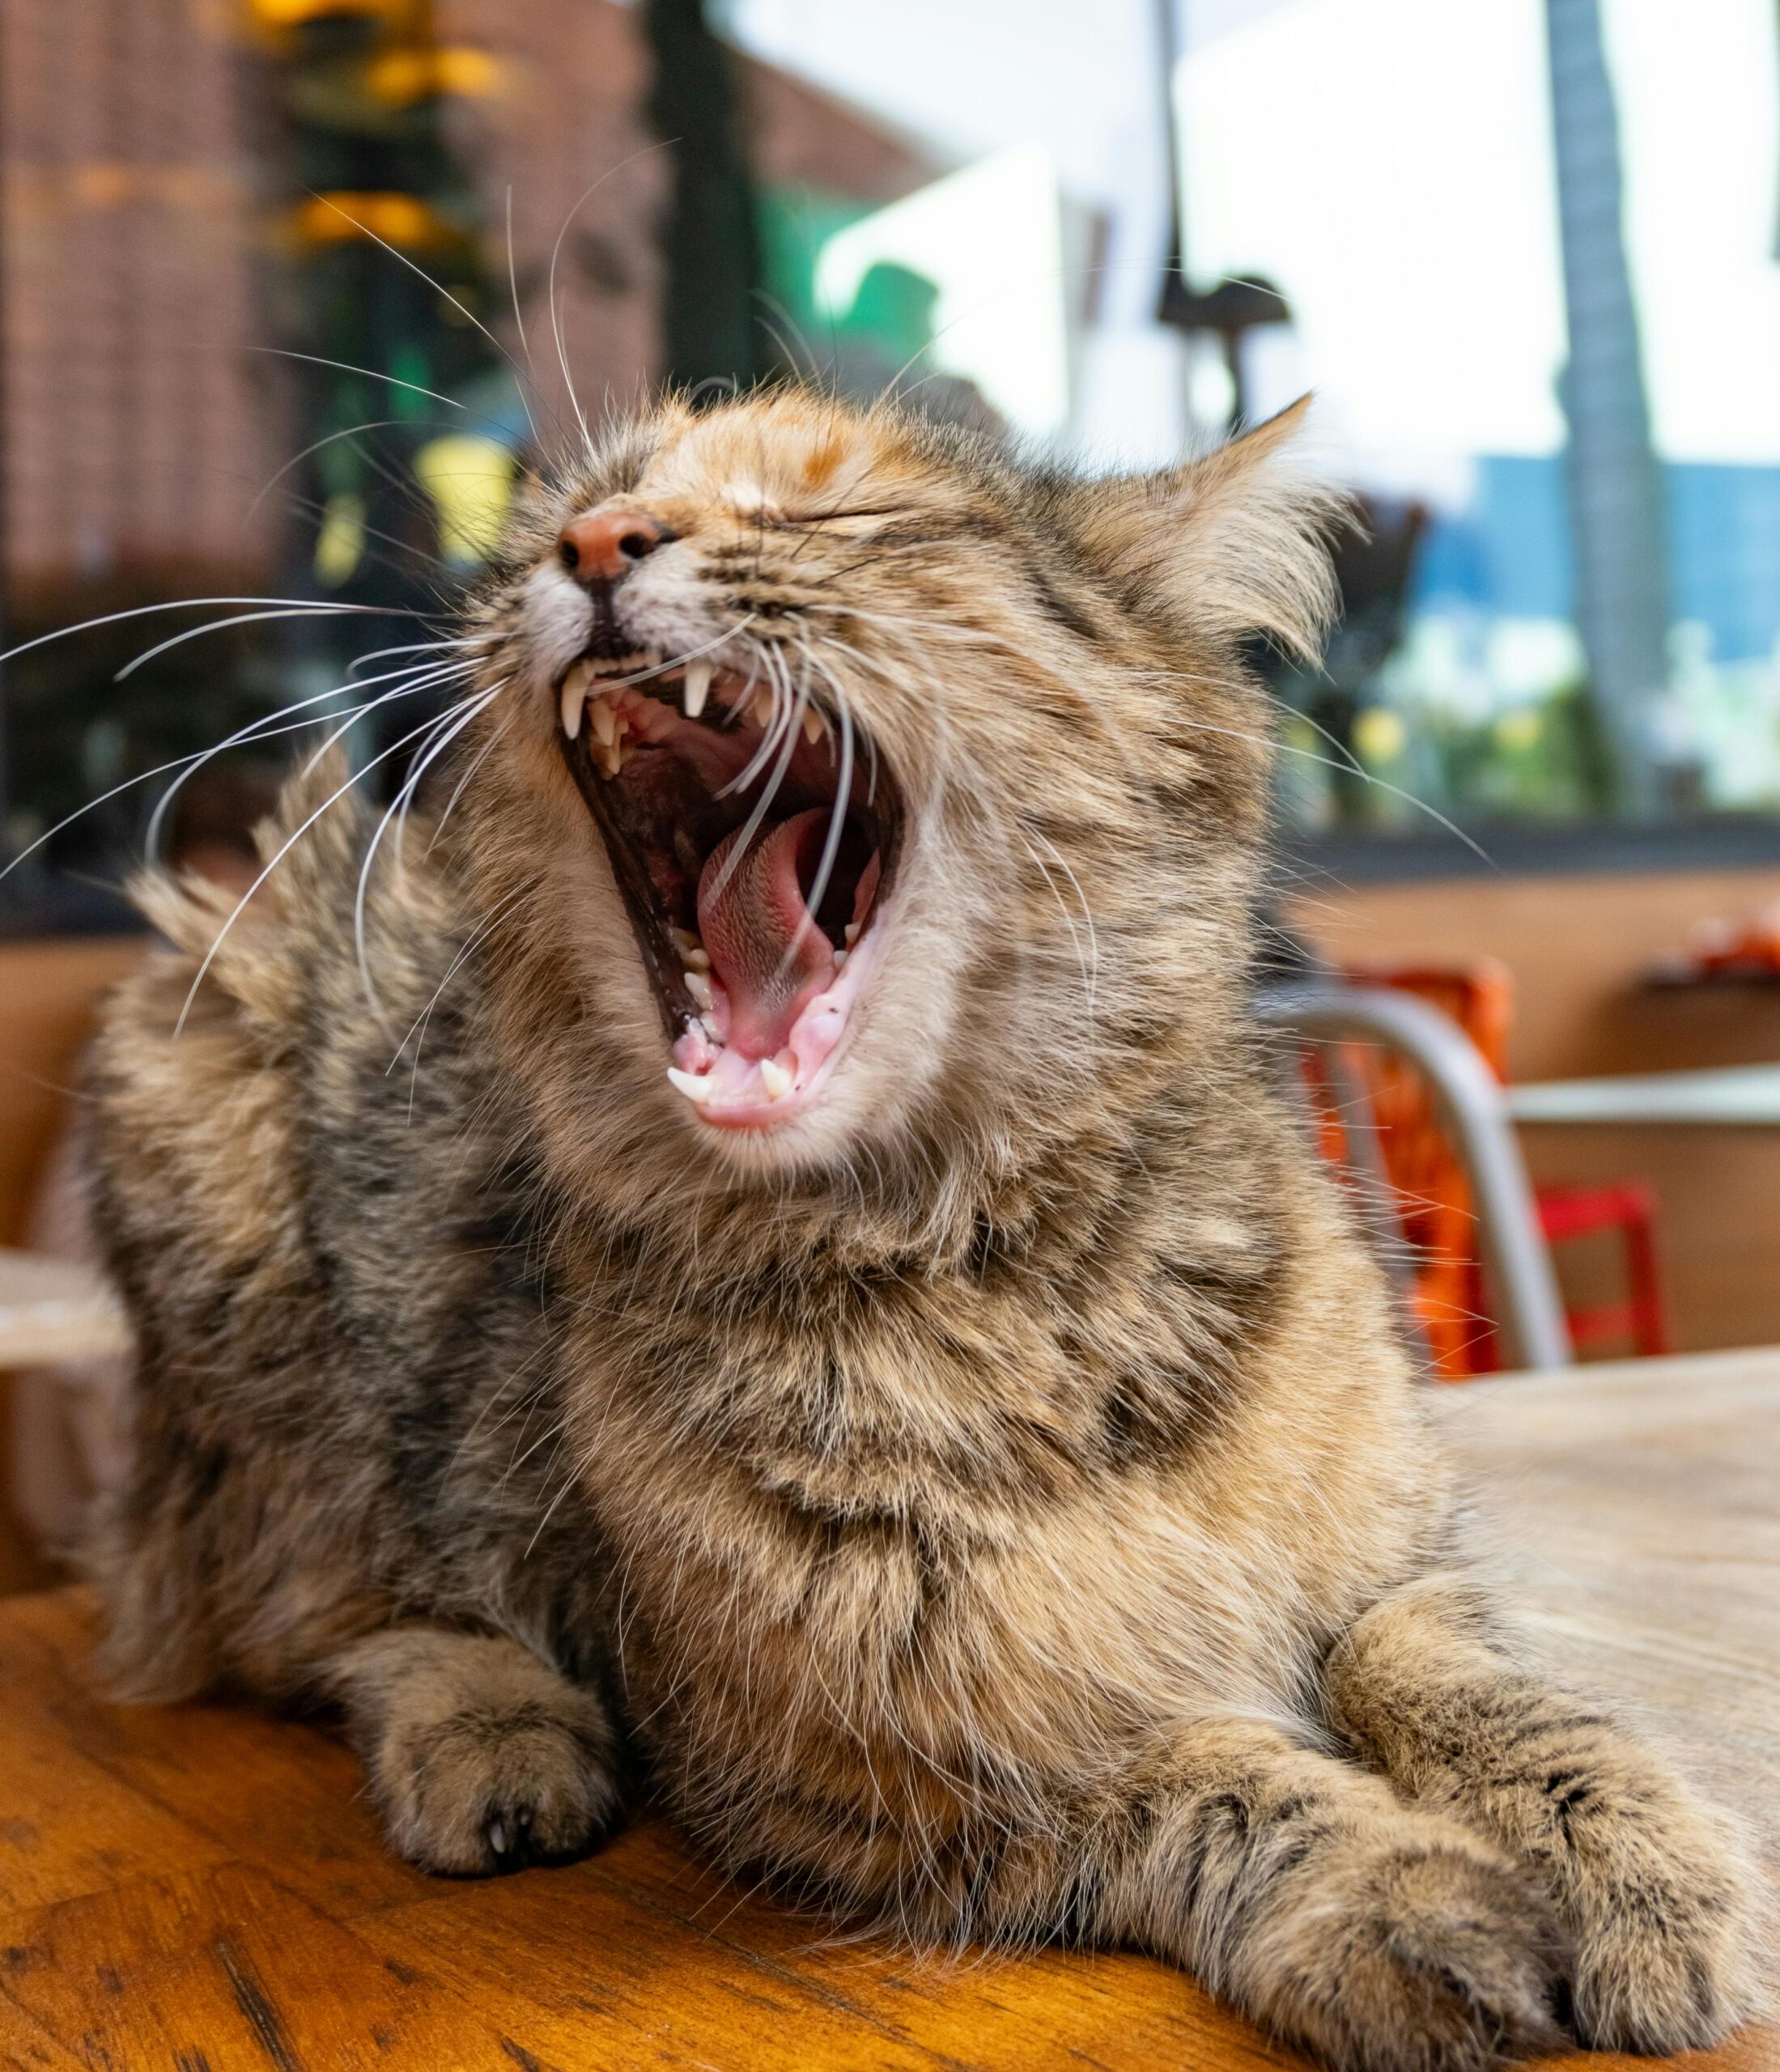 A cat yawning and showing all of its teeth